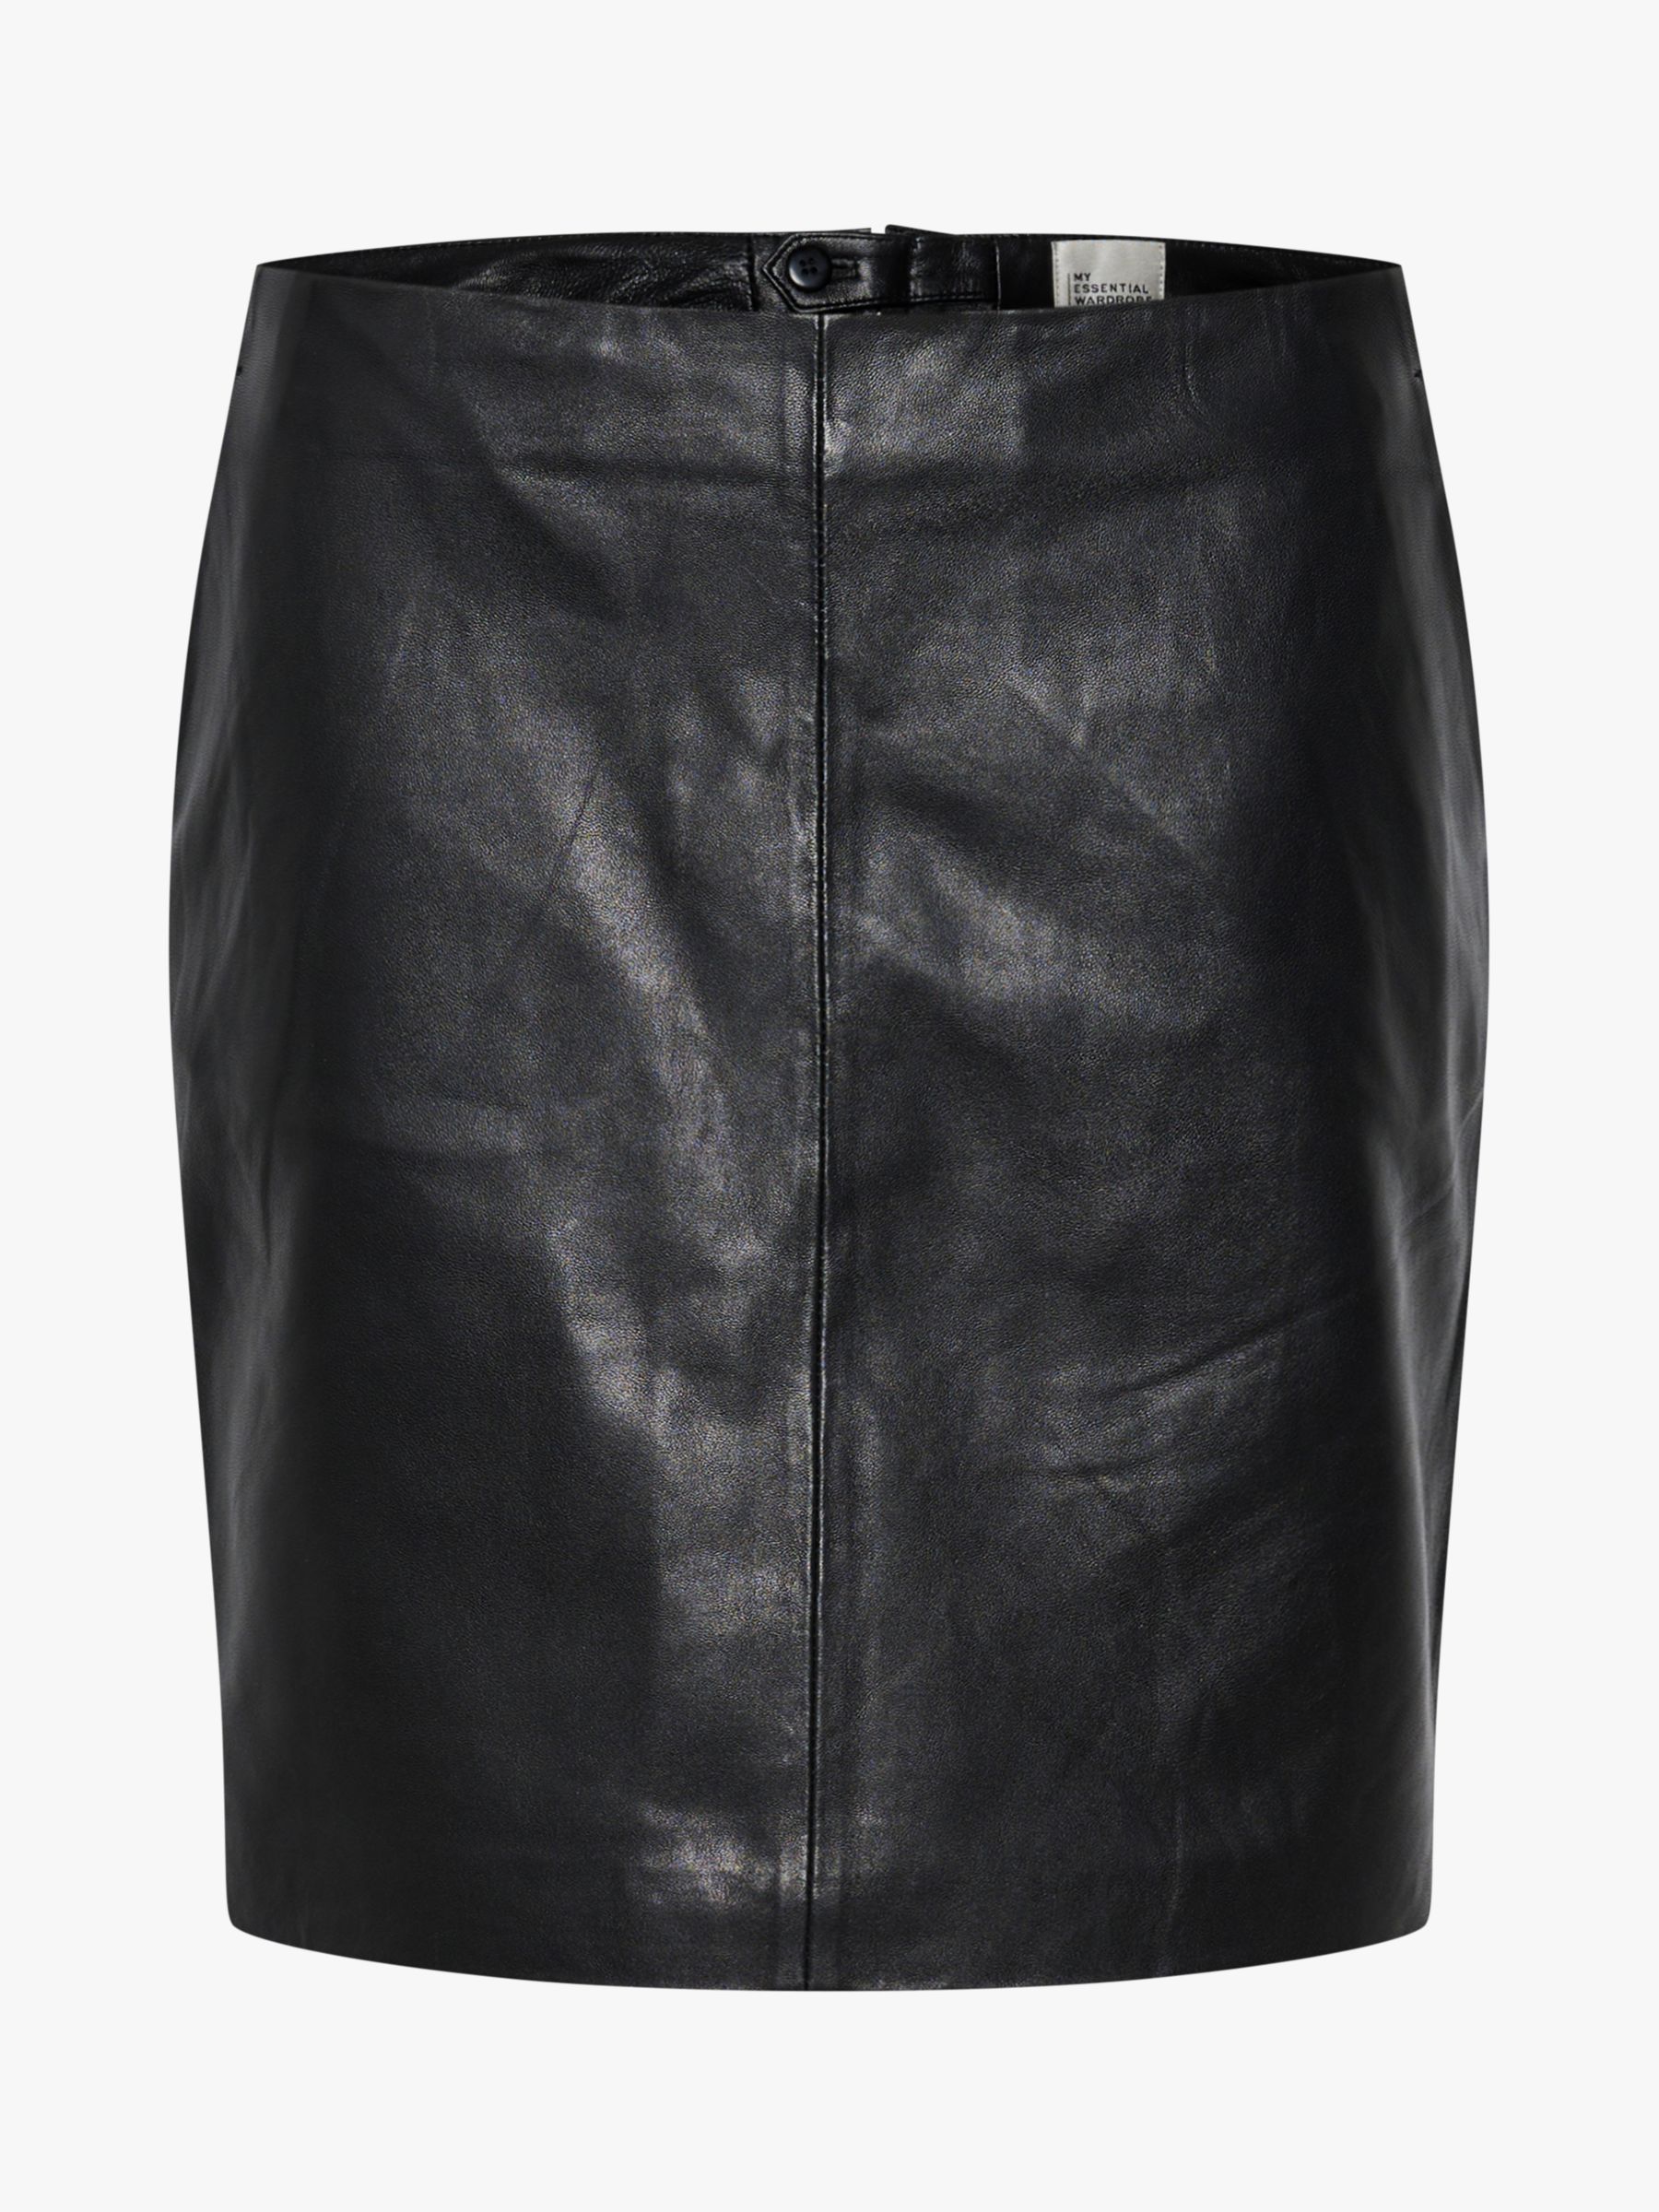 MY ESSENTIAL WARDROBE A Line Leather Skirt, Black at John Lewis & Partners